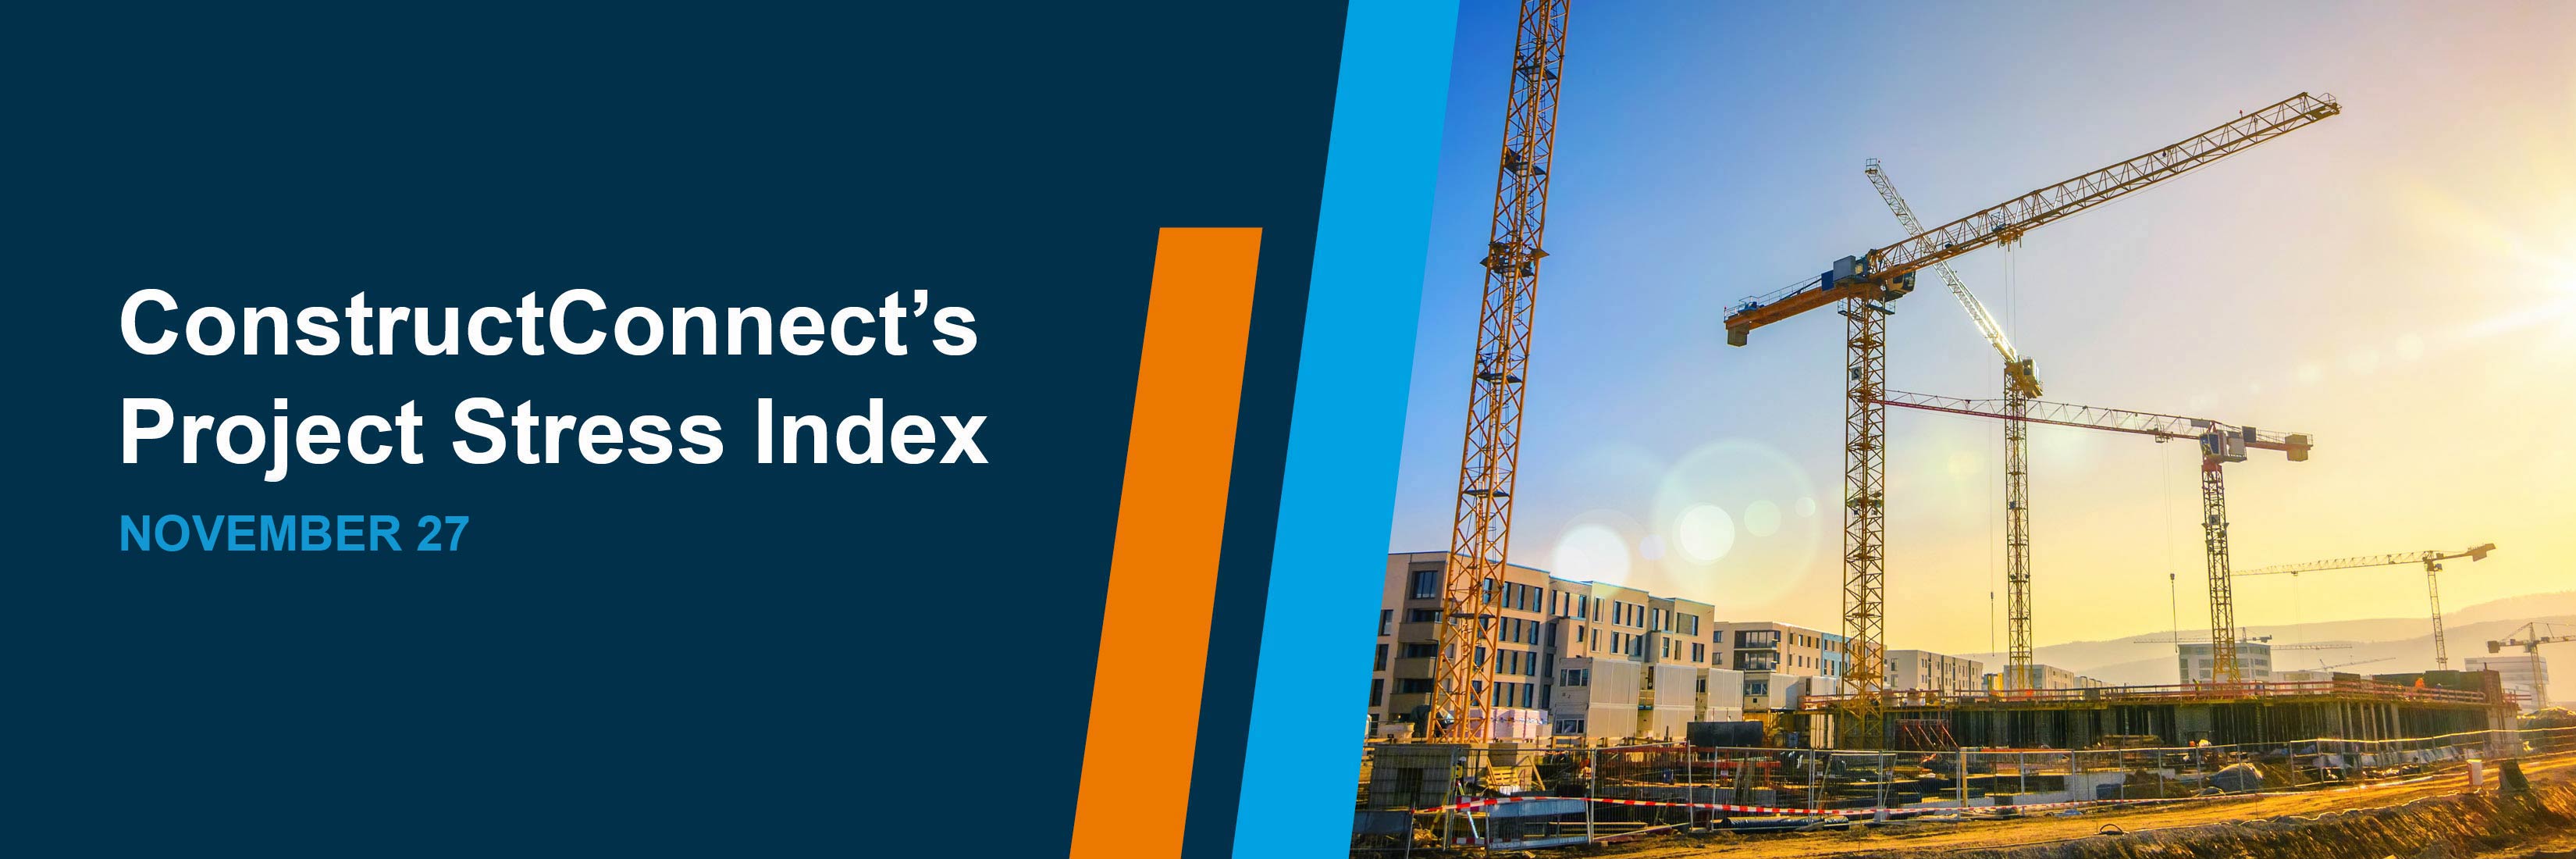 ConstructConnect's Project Stress Index - November 27